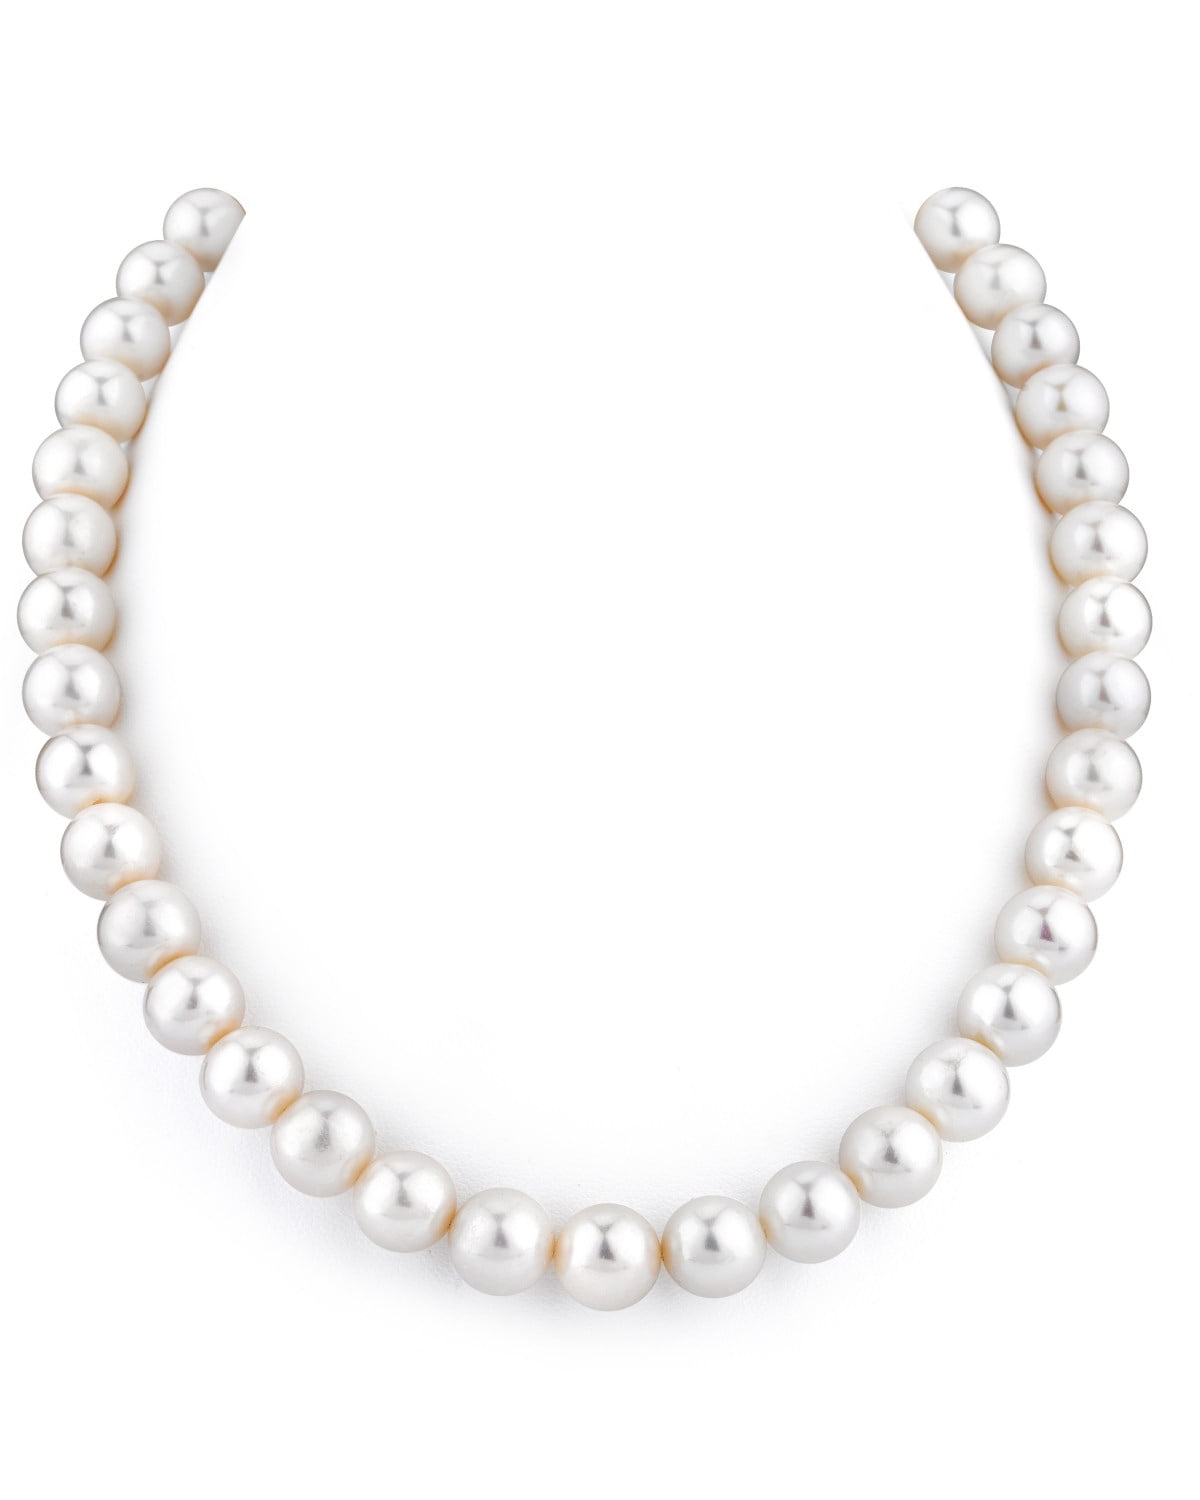 Sterling Silver 5.0-5.5 mm Knotted White Freshwater Pearls 16" 18" 20" Necklace 